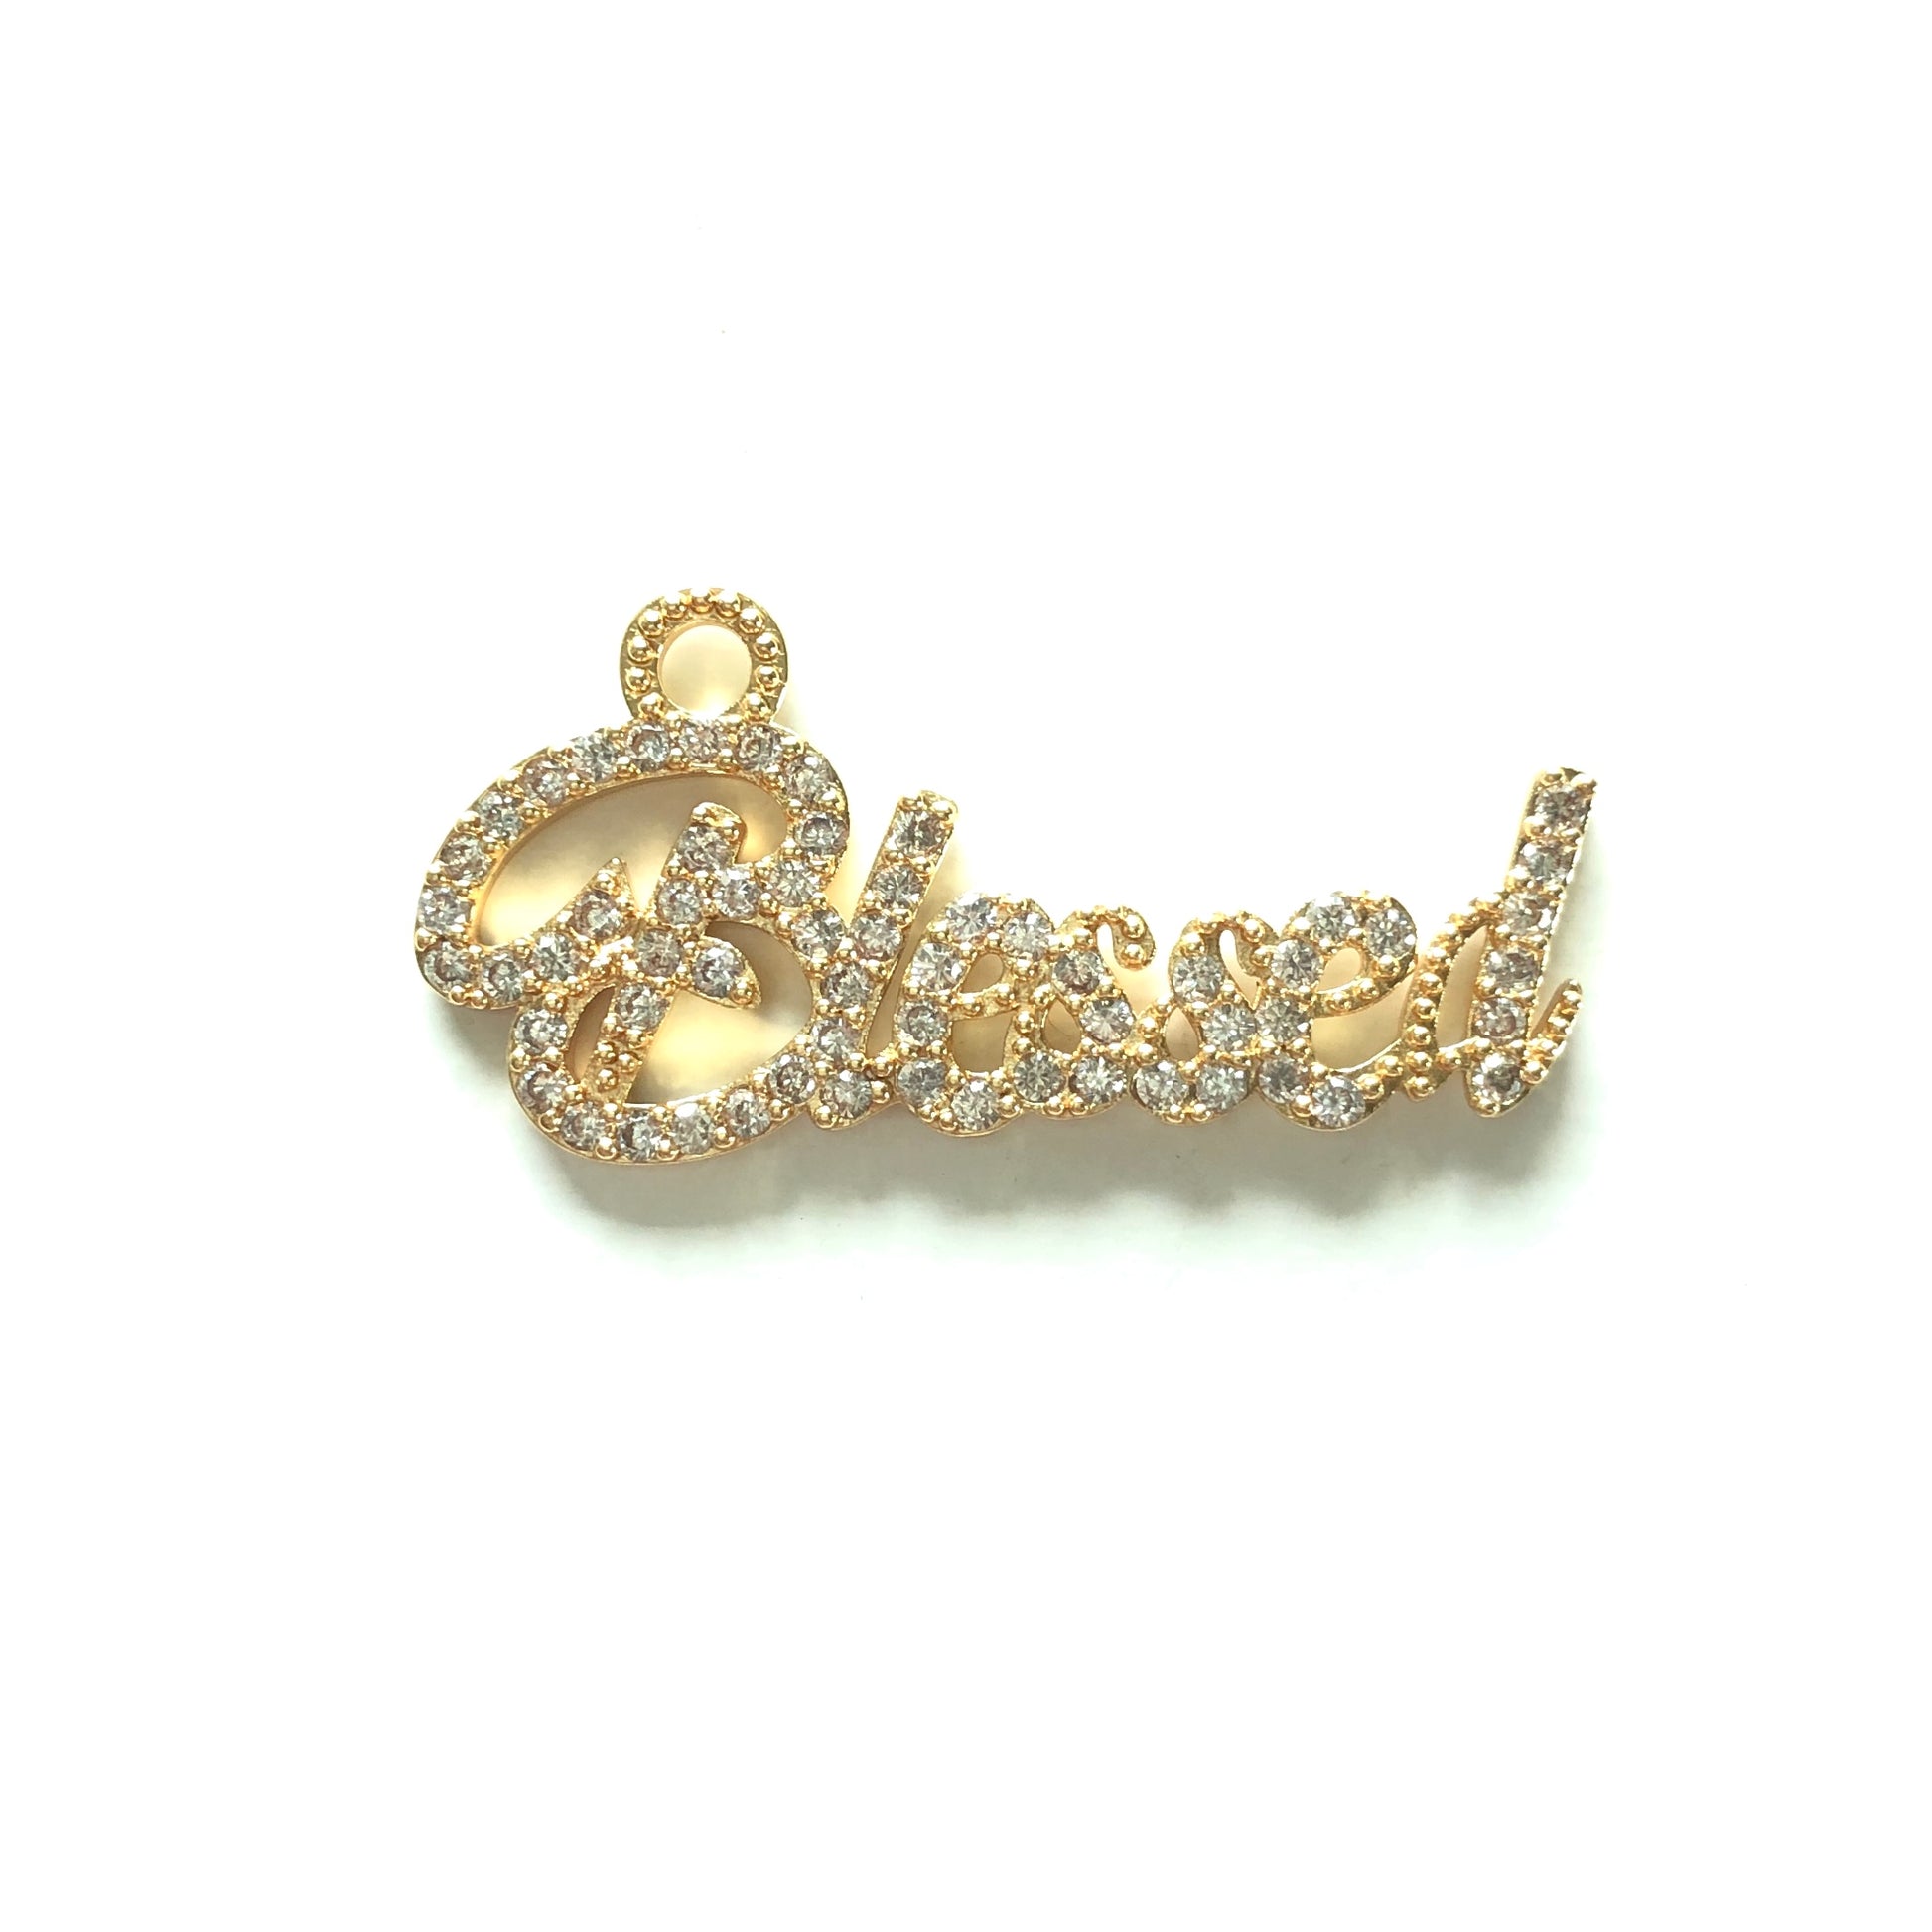 10pcs/lot 35.5*17.3mm CZ Paved Blessed Charms Gold CZ Paved Charms Christian Quotes Words & Quotes Charms Beads Beyond